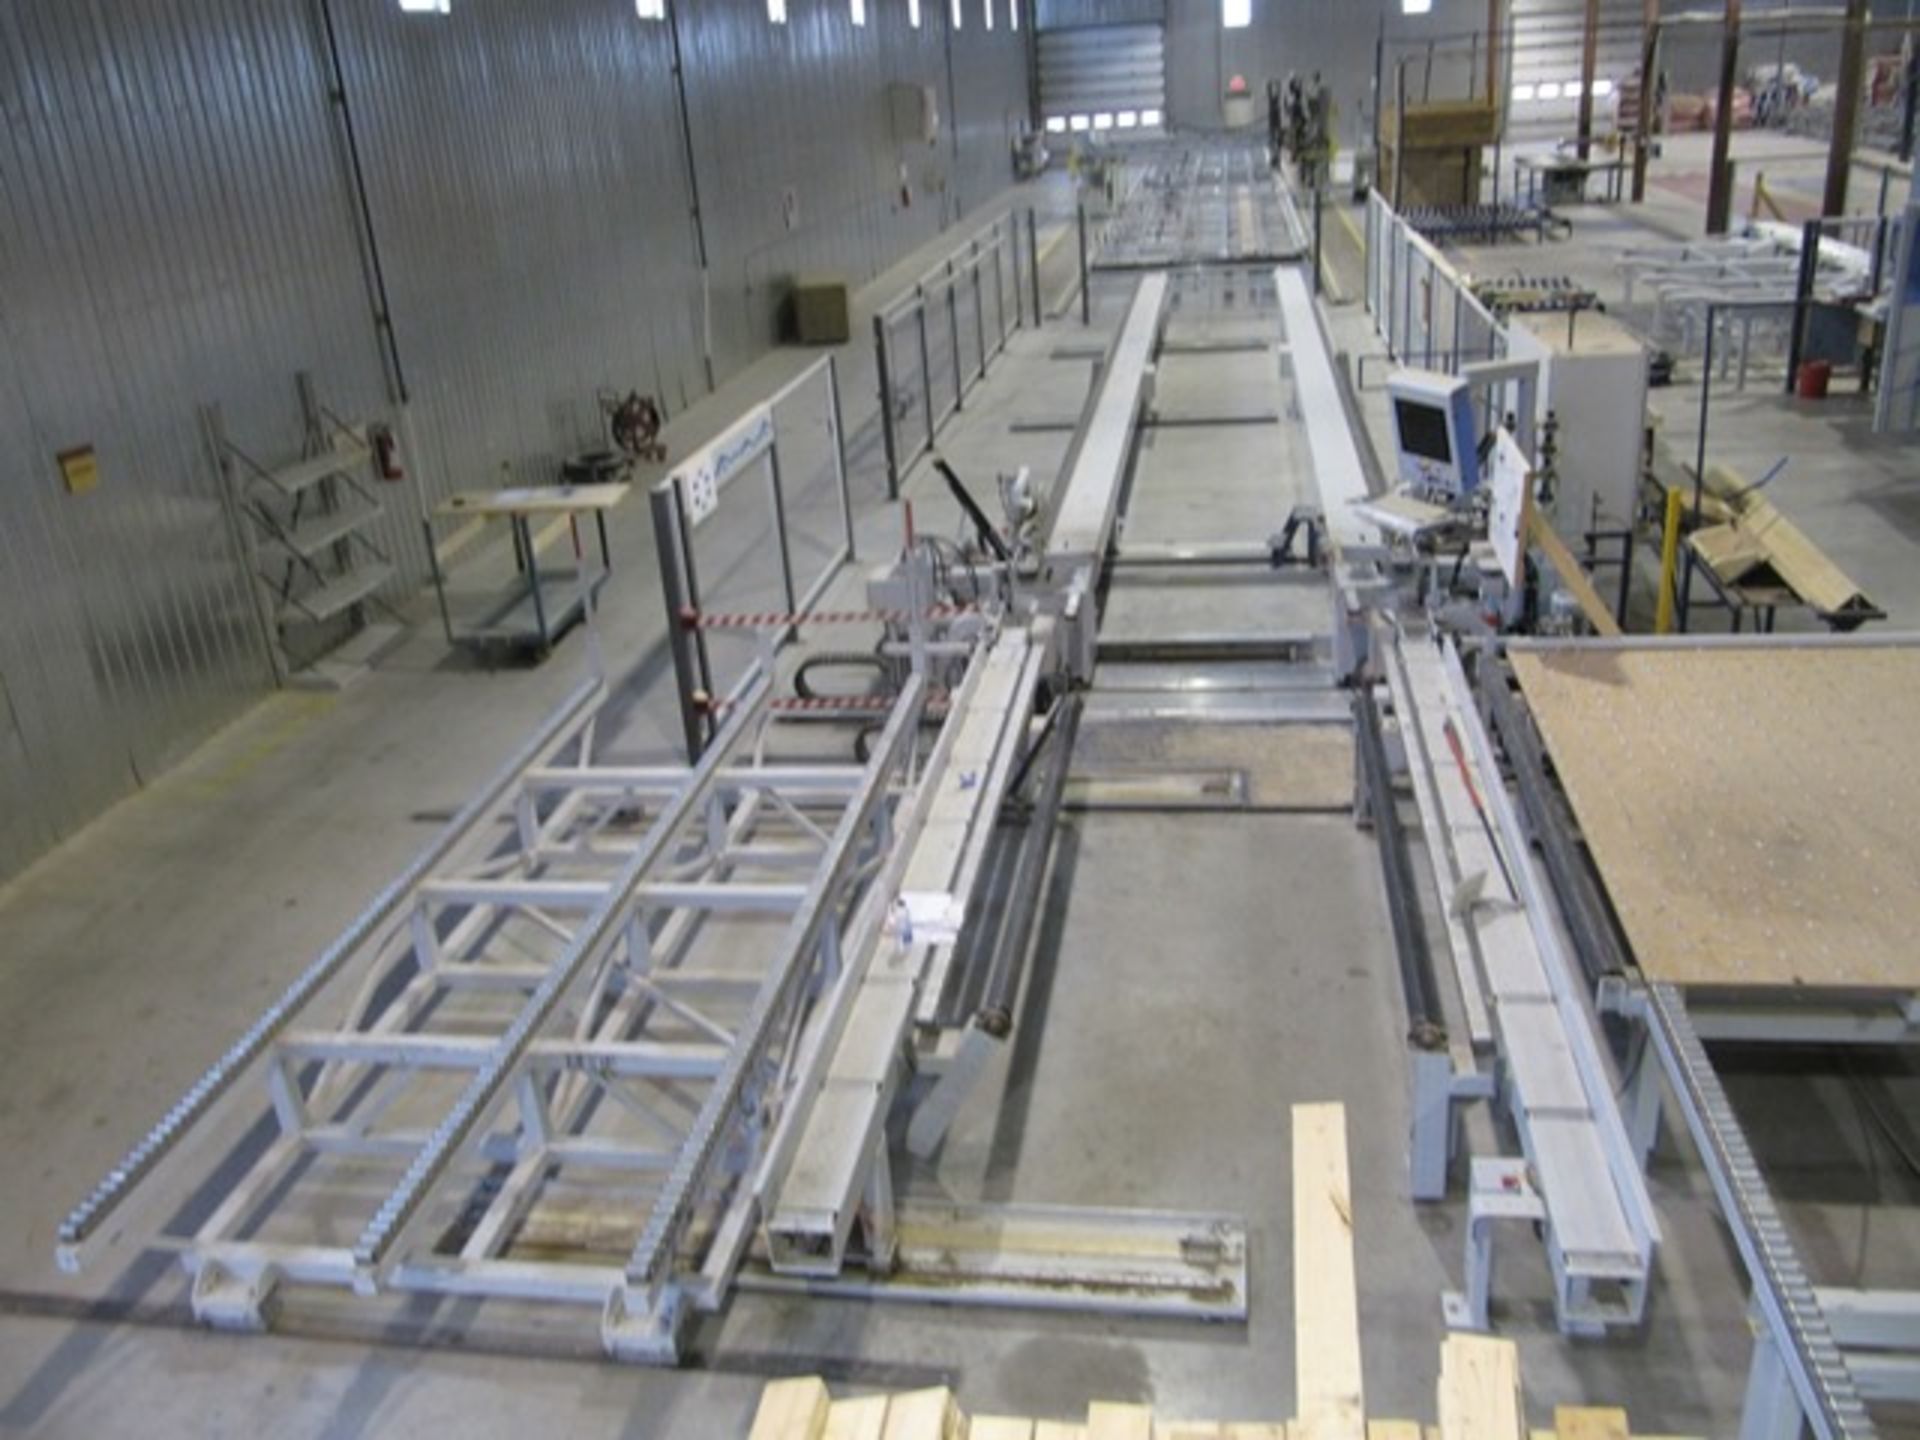 2008 WEINMANN Framing Station, Model WEM 150/12,  In/Out Feed Conveyors   S/N 0-396-14-0026 - Image 2 of 6